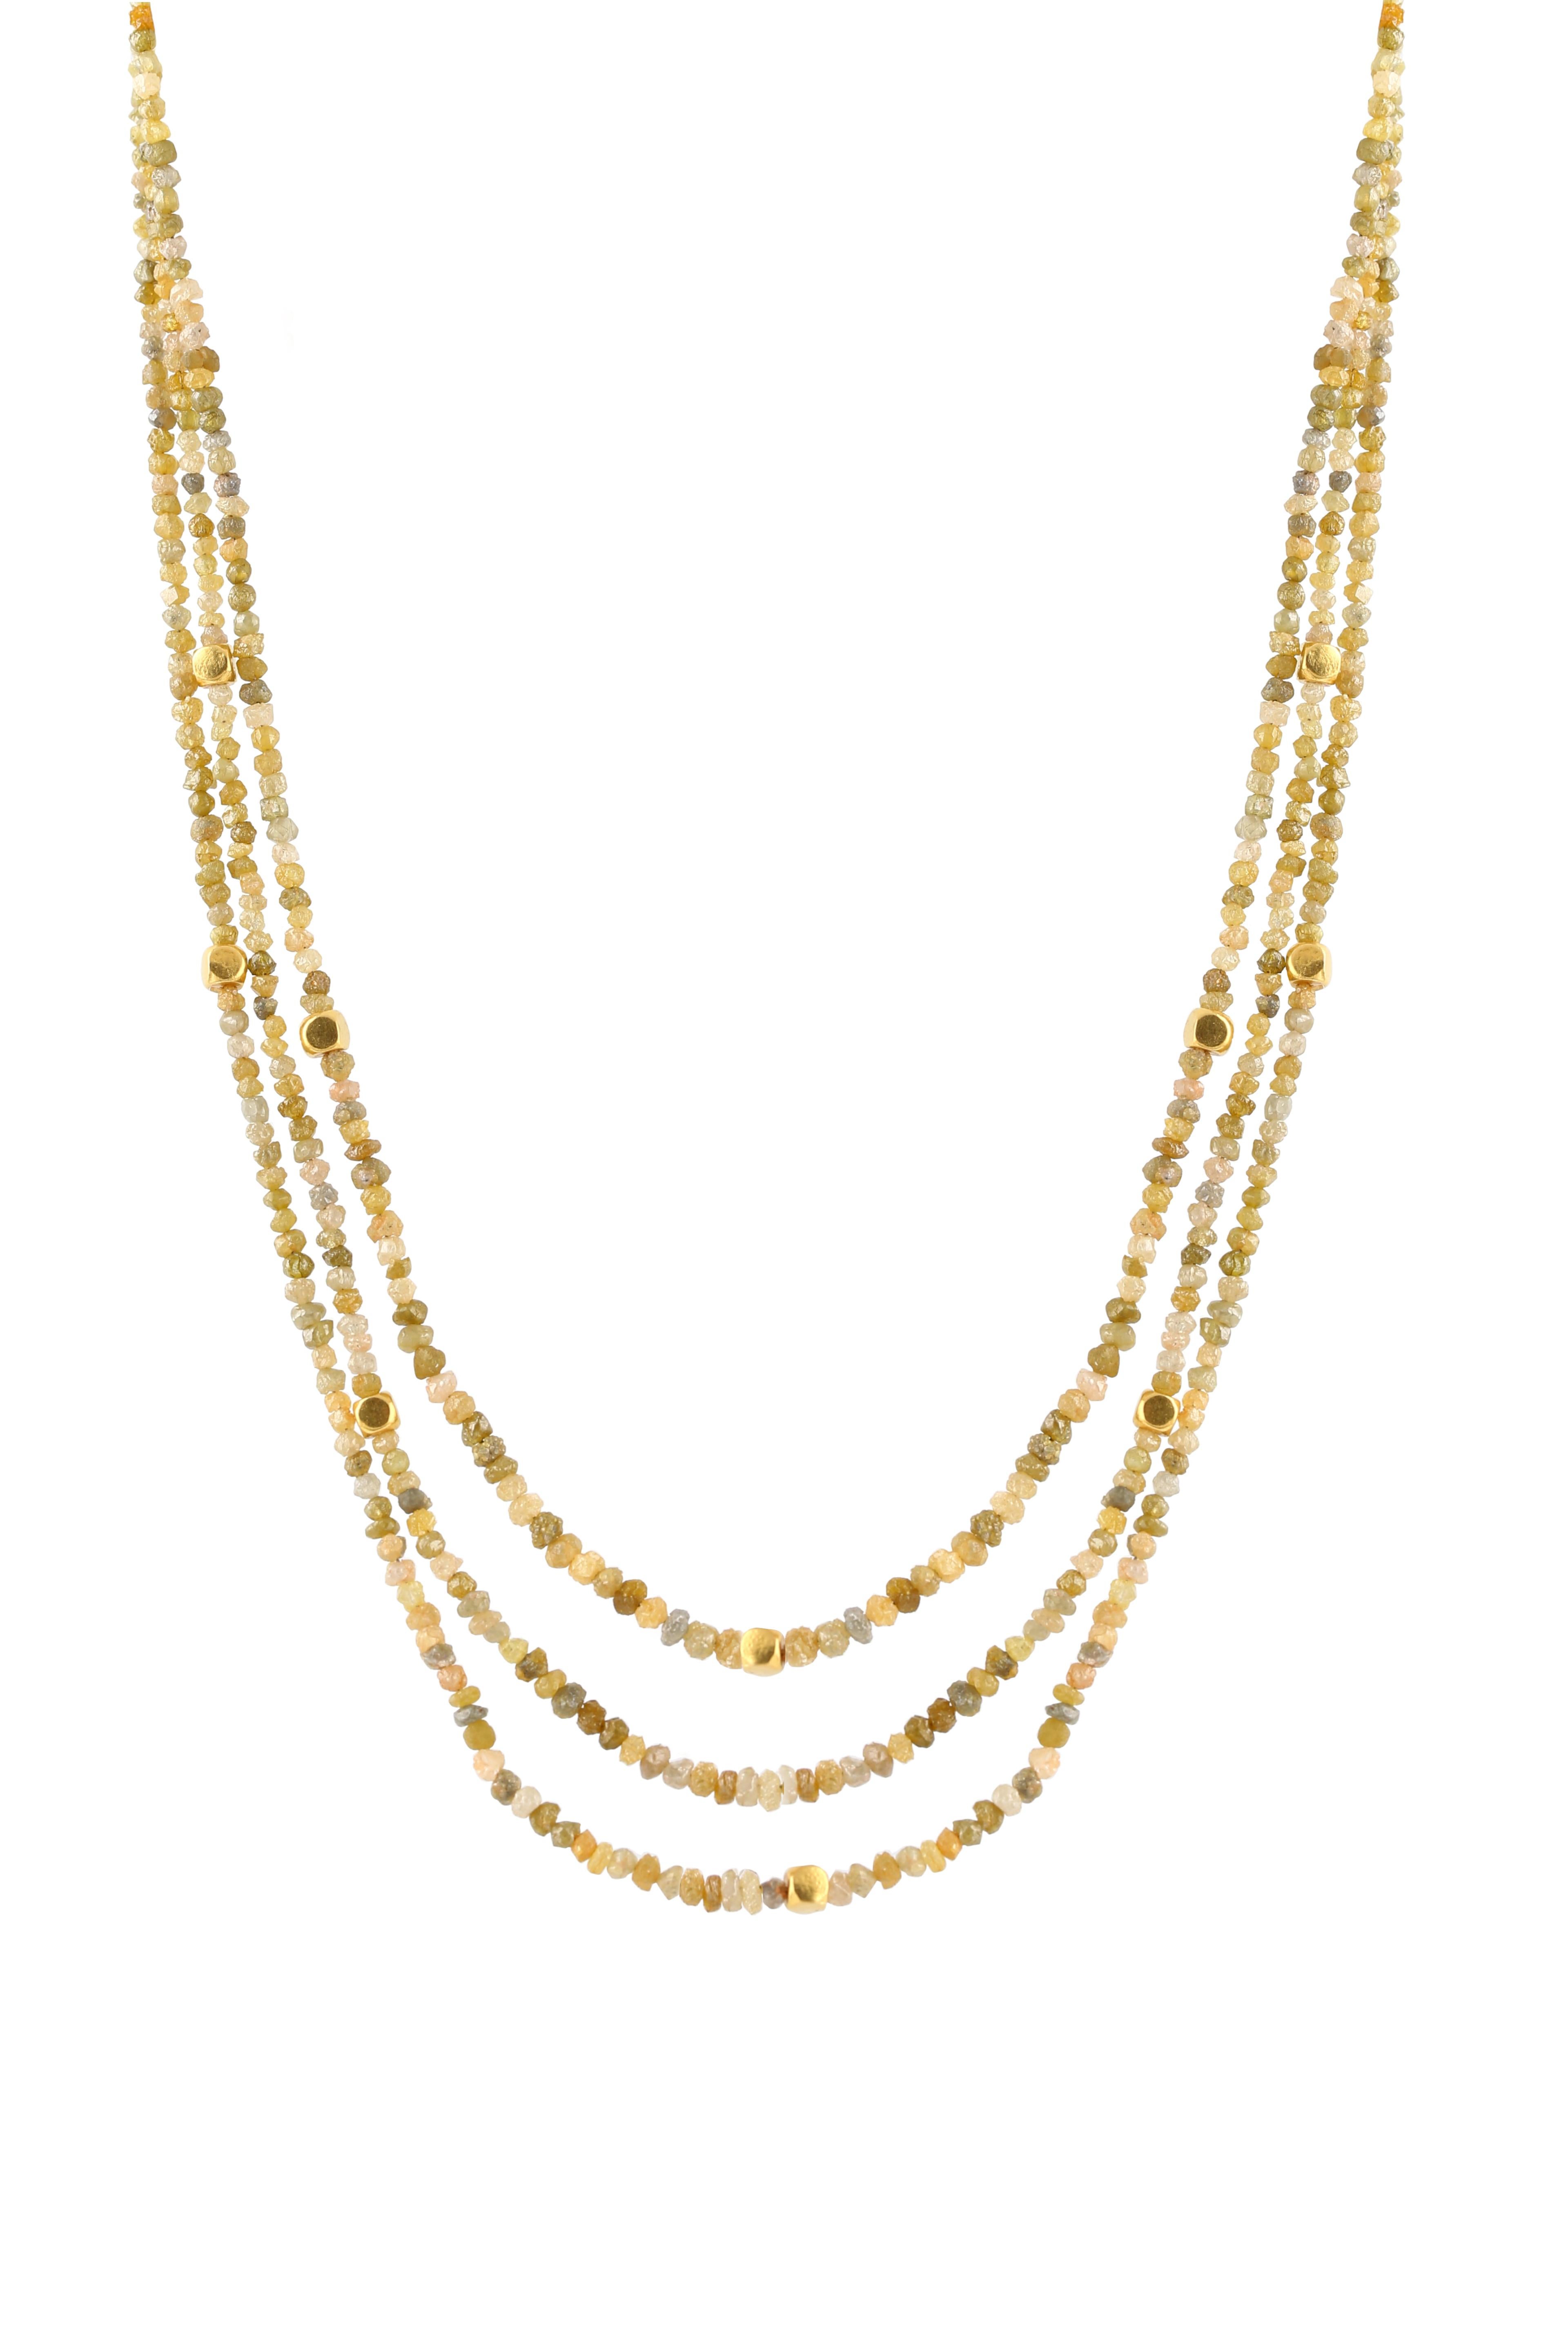 Women's Rough Yellow Diamond Necklace with 18K Gold For Sale